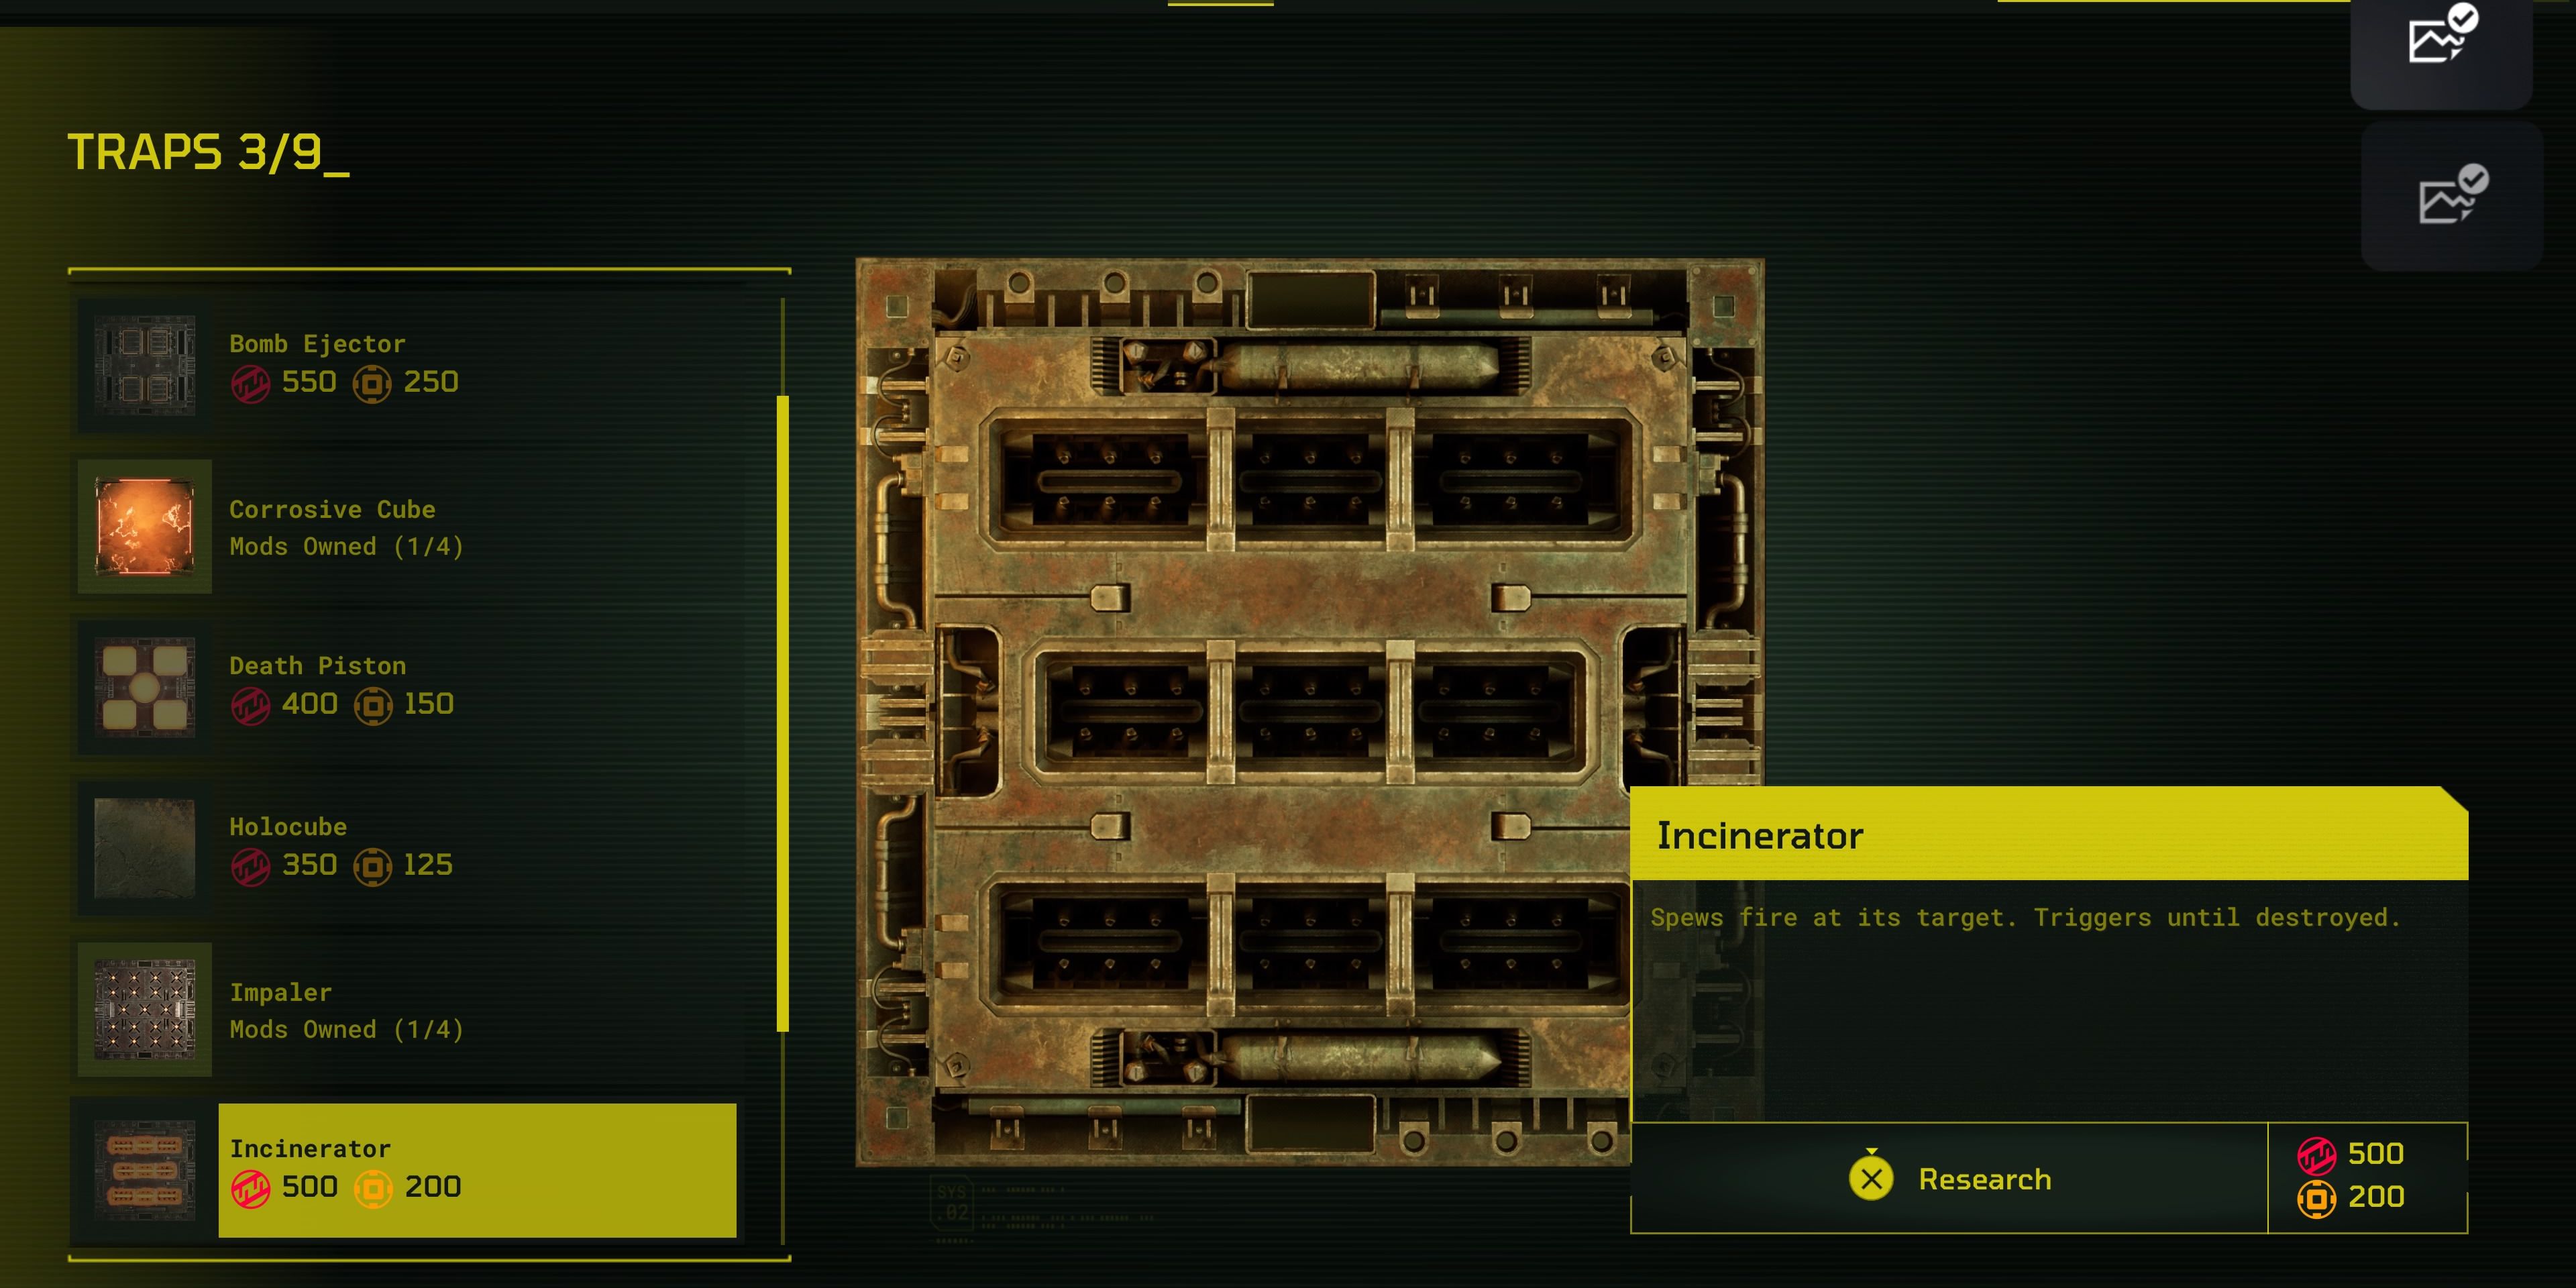 Image shows the Incinerator trap in Meet Your Maker